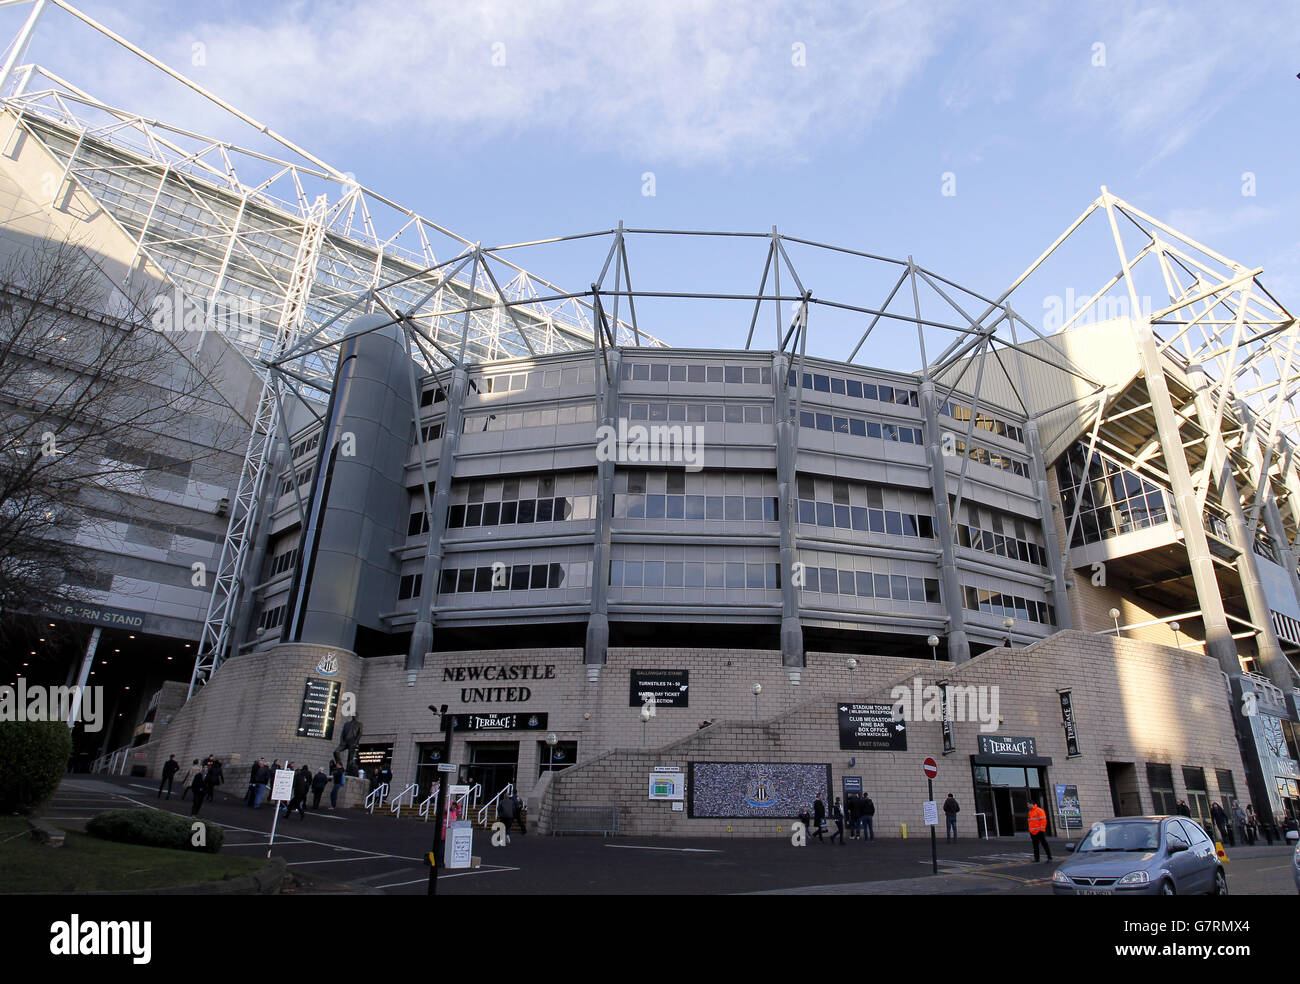 Soccer - Barclays Premier League - Newcastle United v Southampton - St James' Park. General view of St James' Park before the game Stock Photo